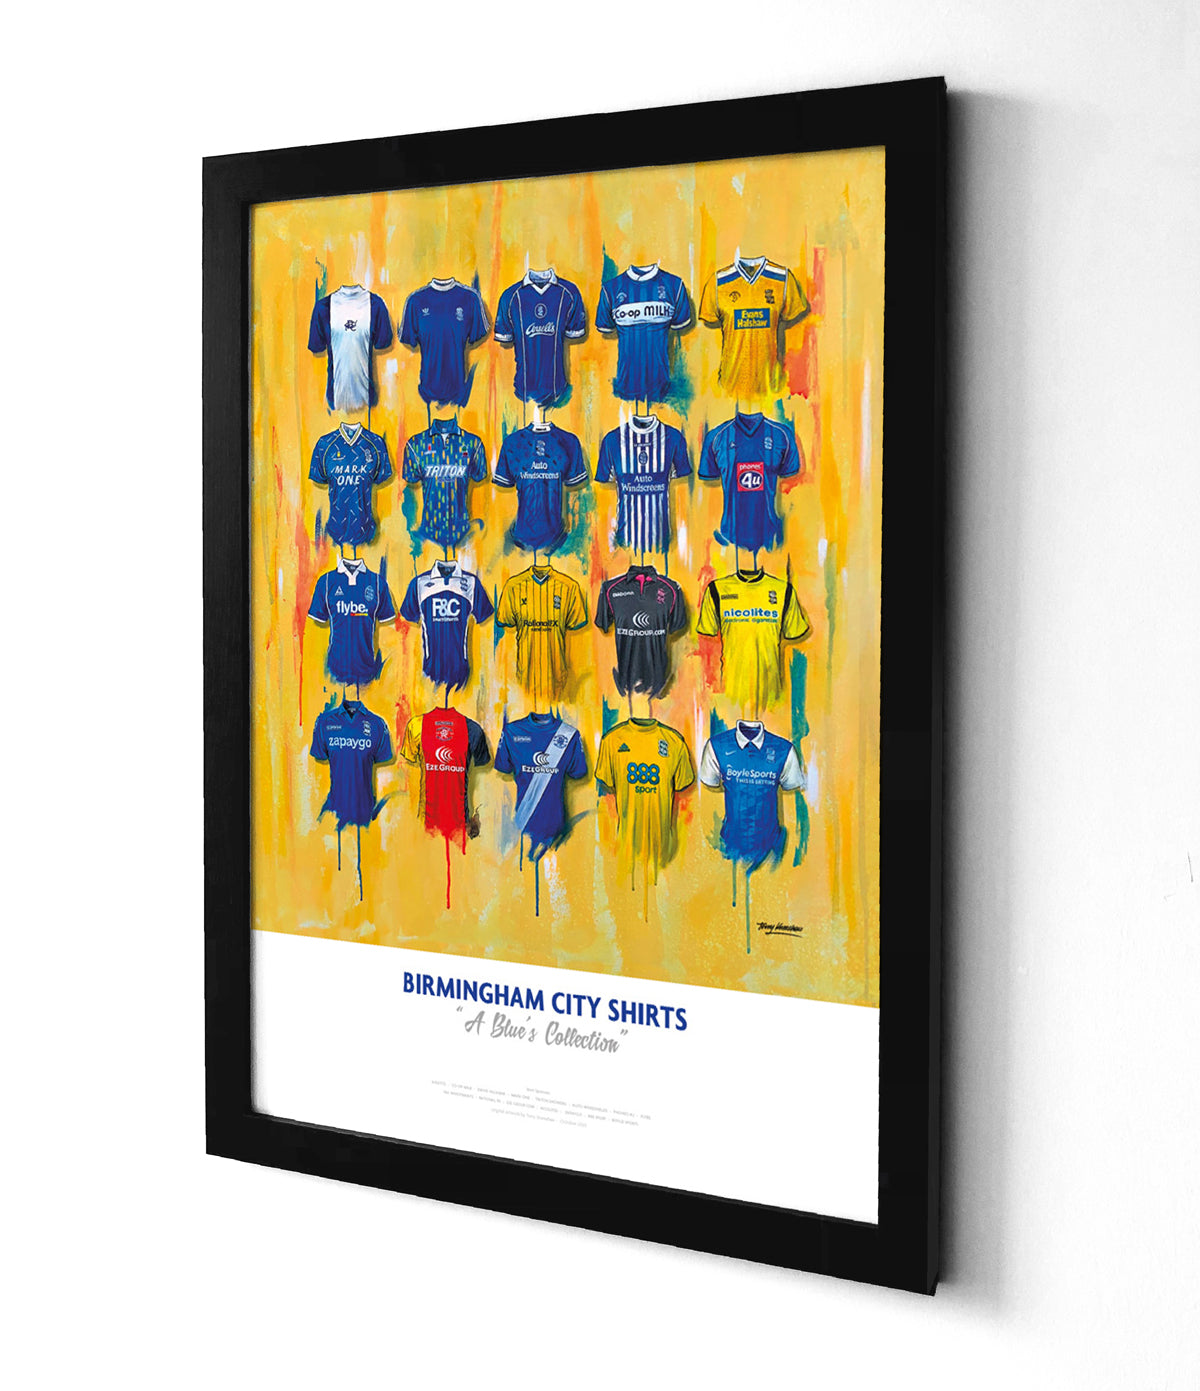 This limited edition A2 print by Terry Kneeshaw features 20 iconic jerseys of Birmingham football club, customized with a personal touch. The artwork showcases the club's history and achievements through various eras, from its early years to the present. The jerseys are beautifully illustrated in vibrant colors, with each one bearing a unique personal message. The print is perfect for any avid Birmingham fan or collector, offering a unique and personal way to celebrate the club's rich history.